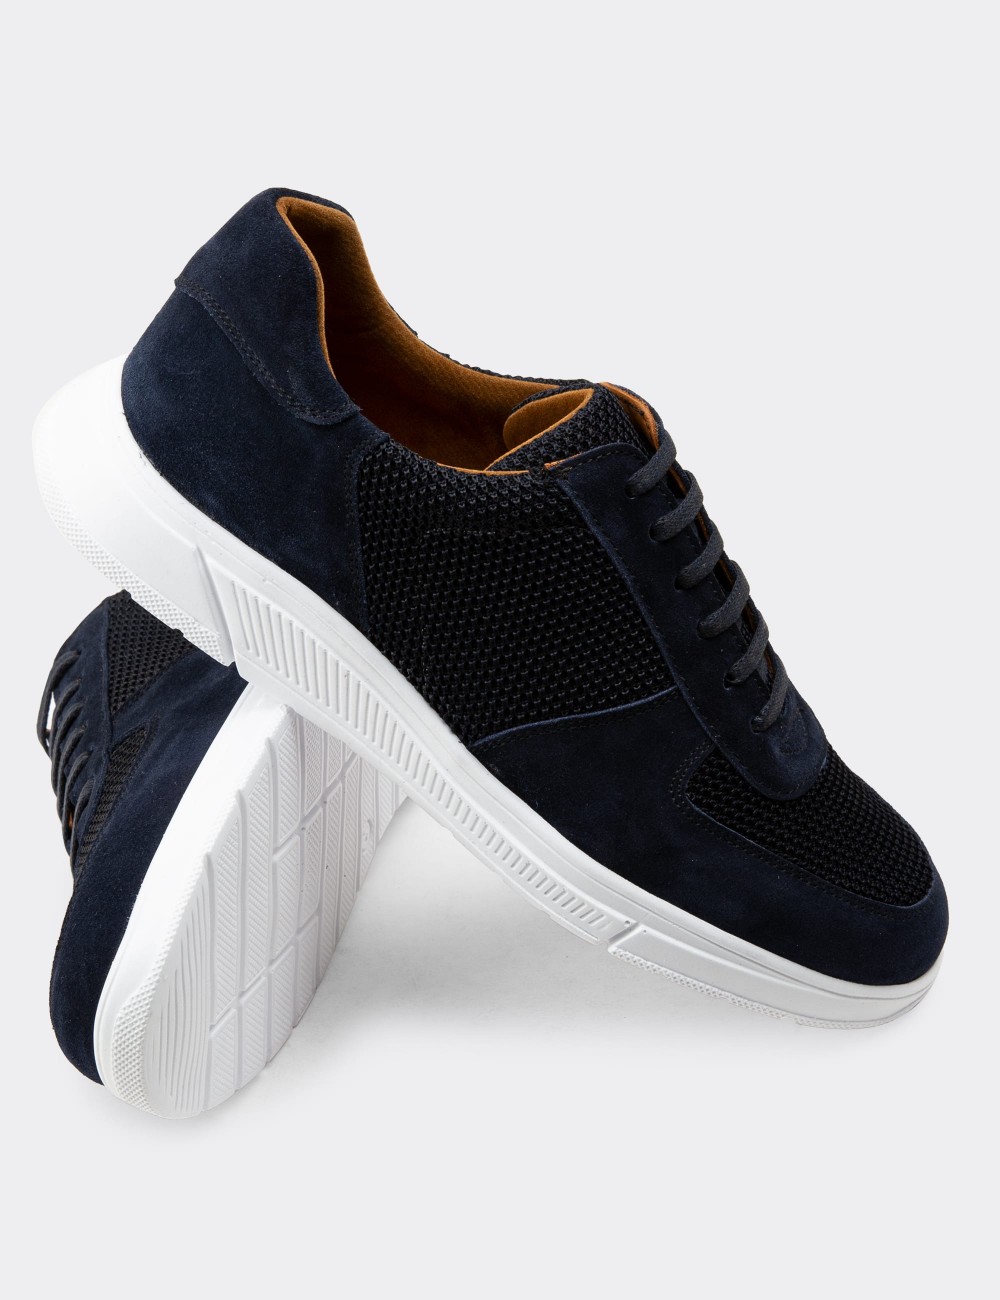 Navy Suede Leather Sneakers - 01860MLCVC01